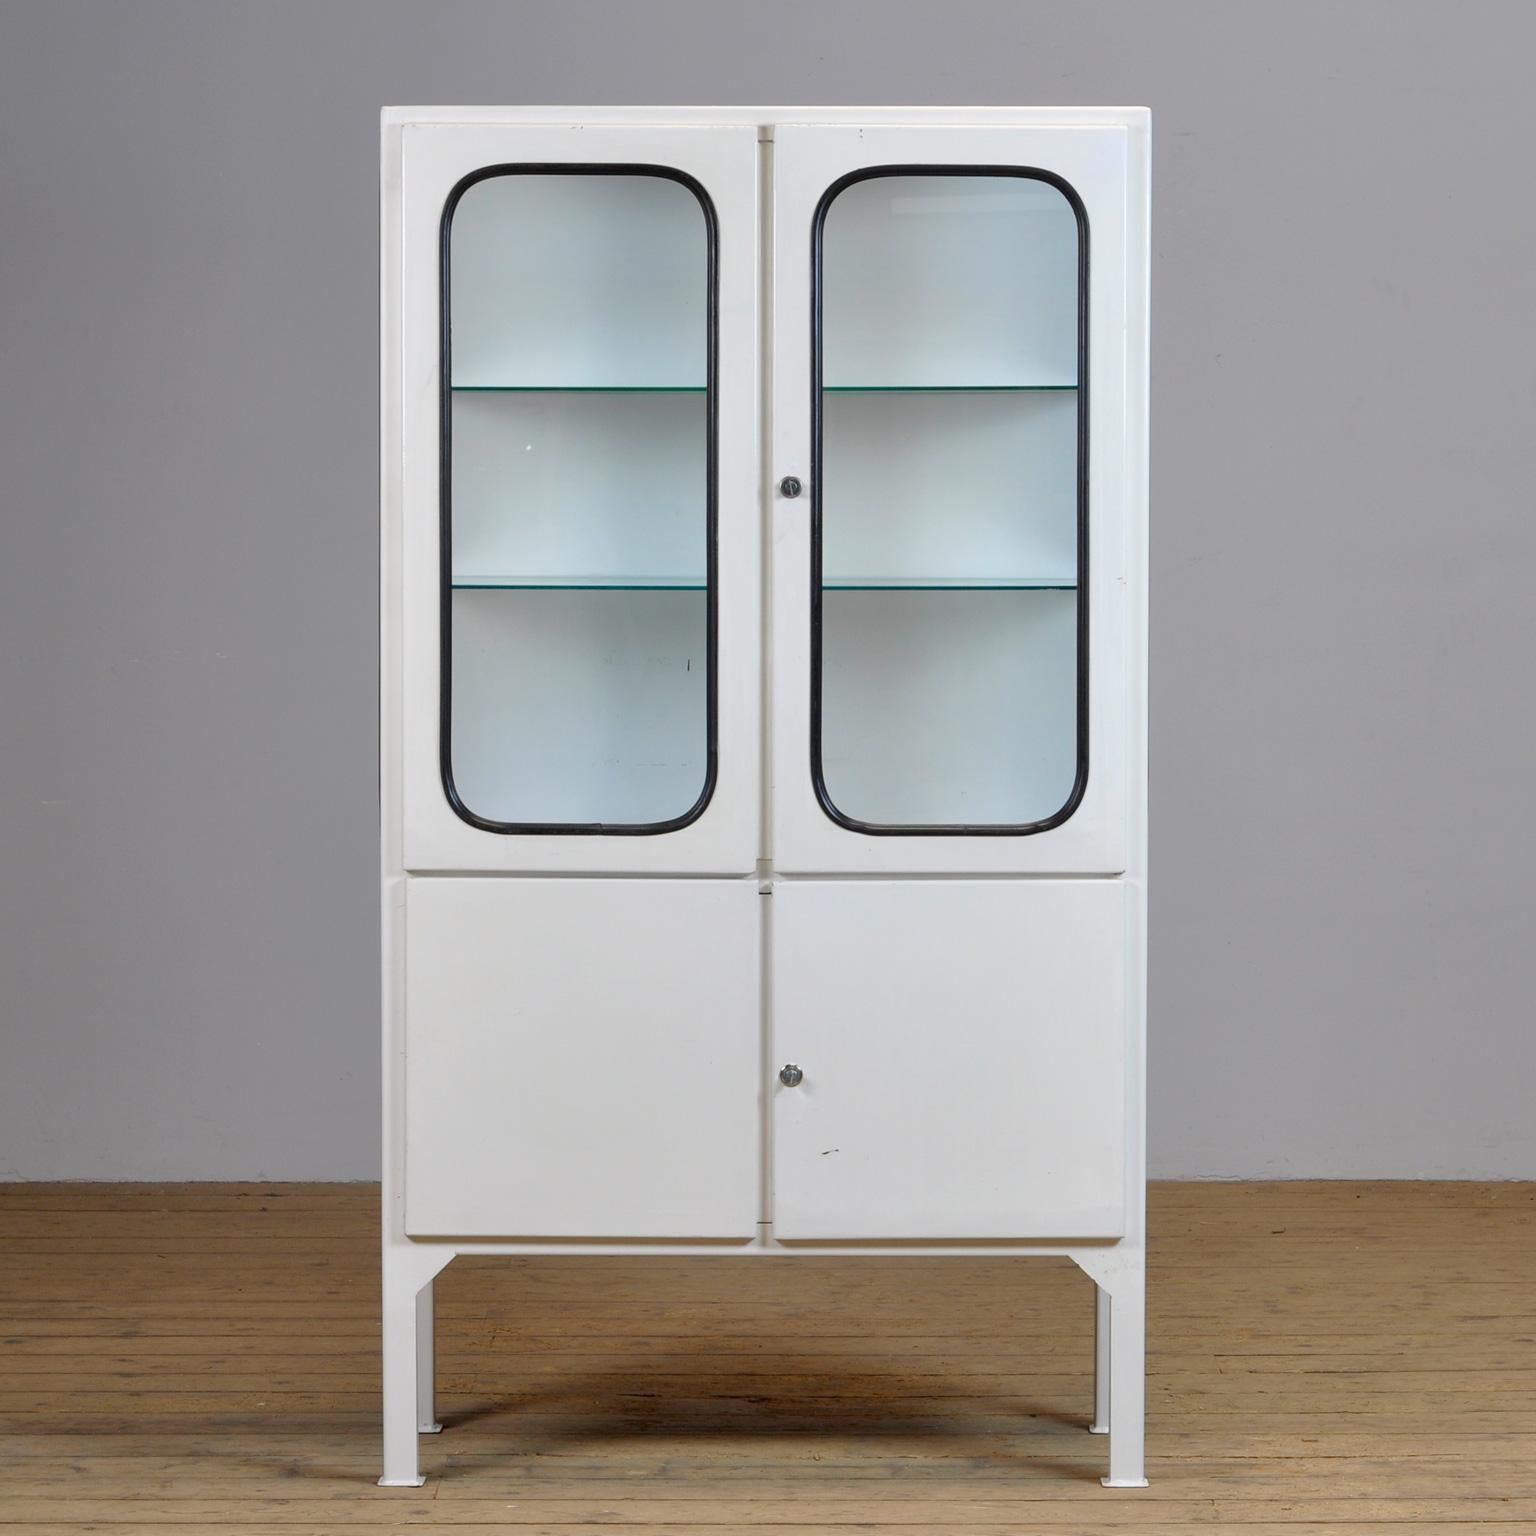 This medicine cabinet was designed in the 1970s and was produced circa 1975 in hungary. It is made from iron and glass, and the glass is held by a black rubber strip. The cabinet features two adjustable glass shelves and functioning locks.
